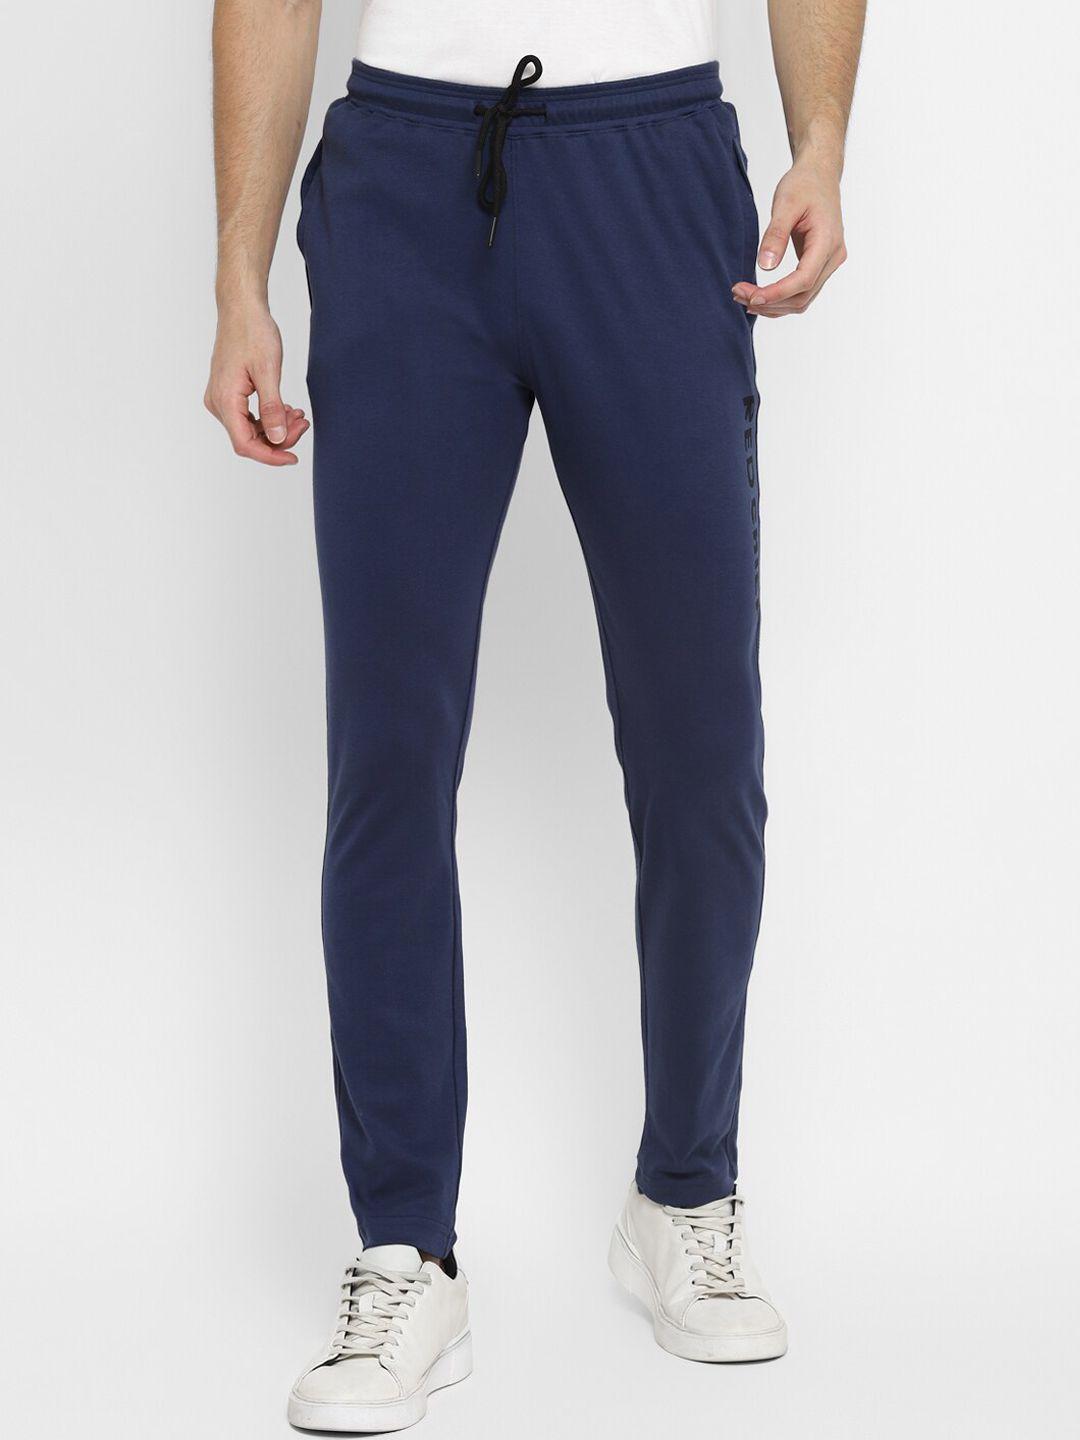 red-chief-men-navy-blue-solid-slim-fit-cotton-track-pants